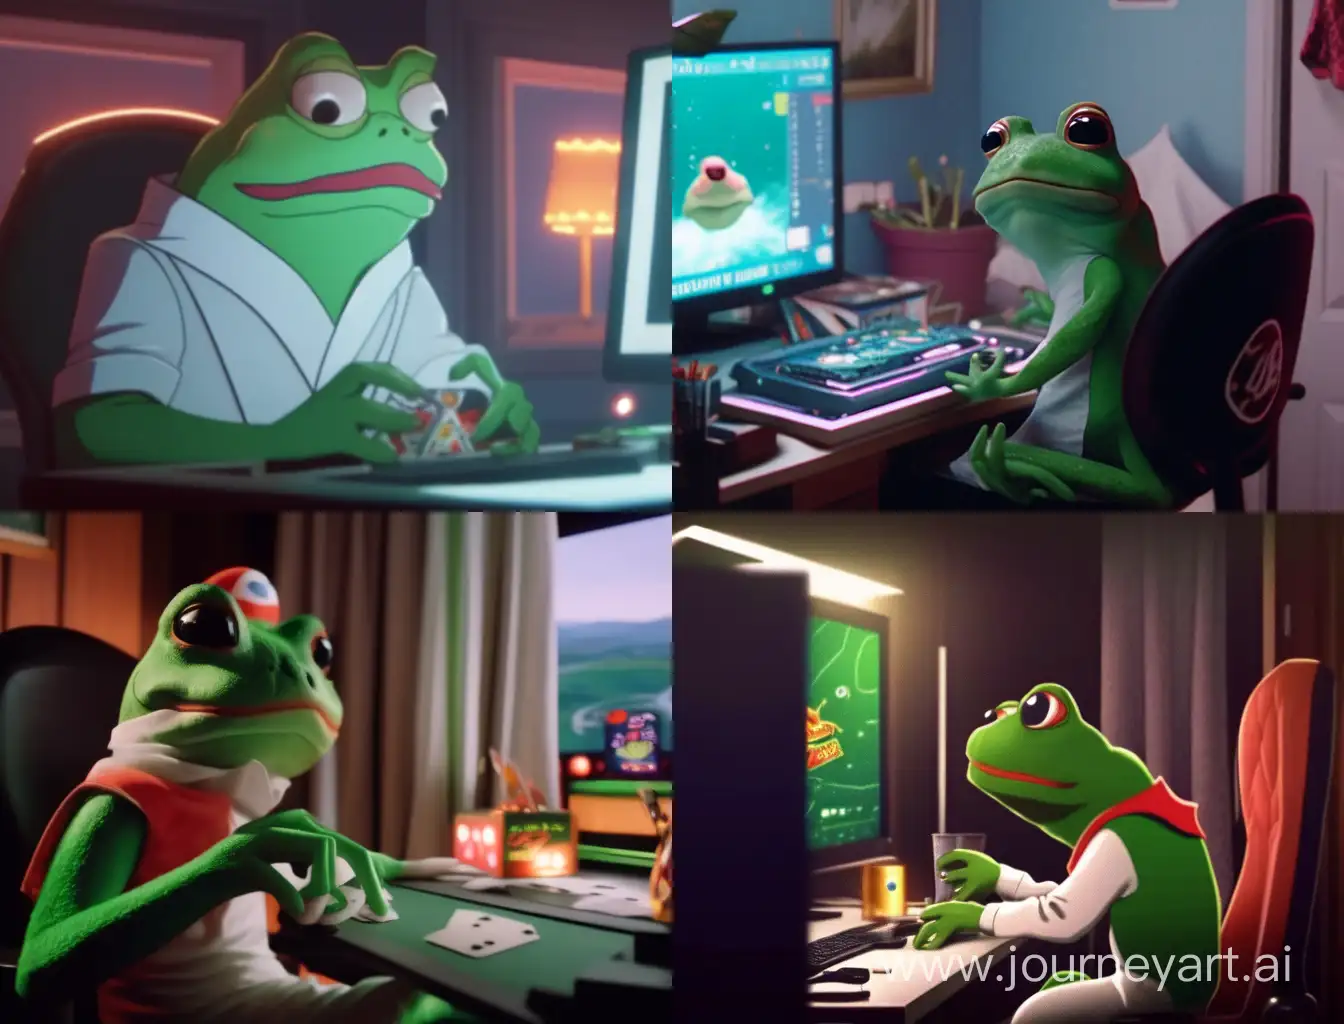 Pepe-Frog-Engages-in-Online-Casino-Gaming-Niji-Room-Entertainment